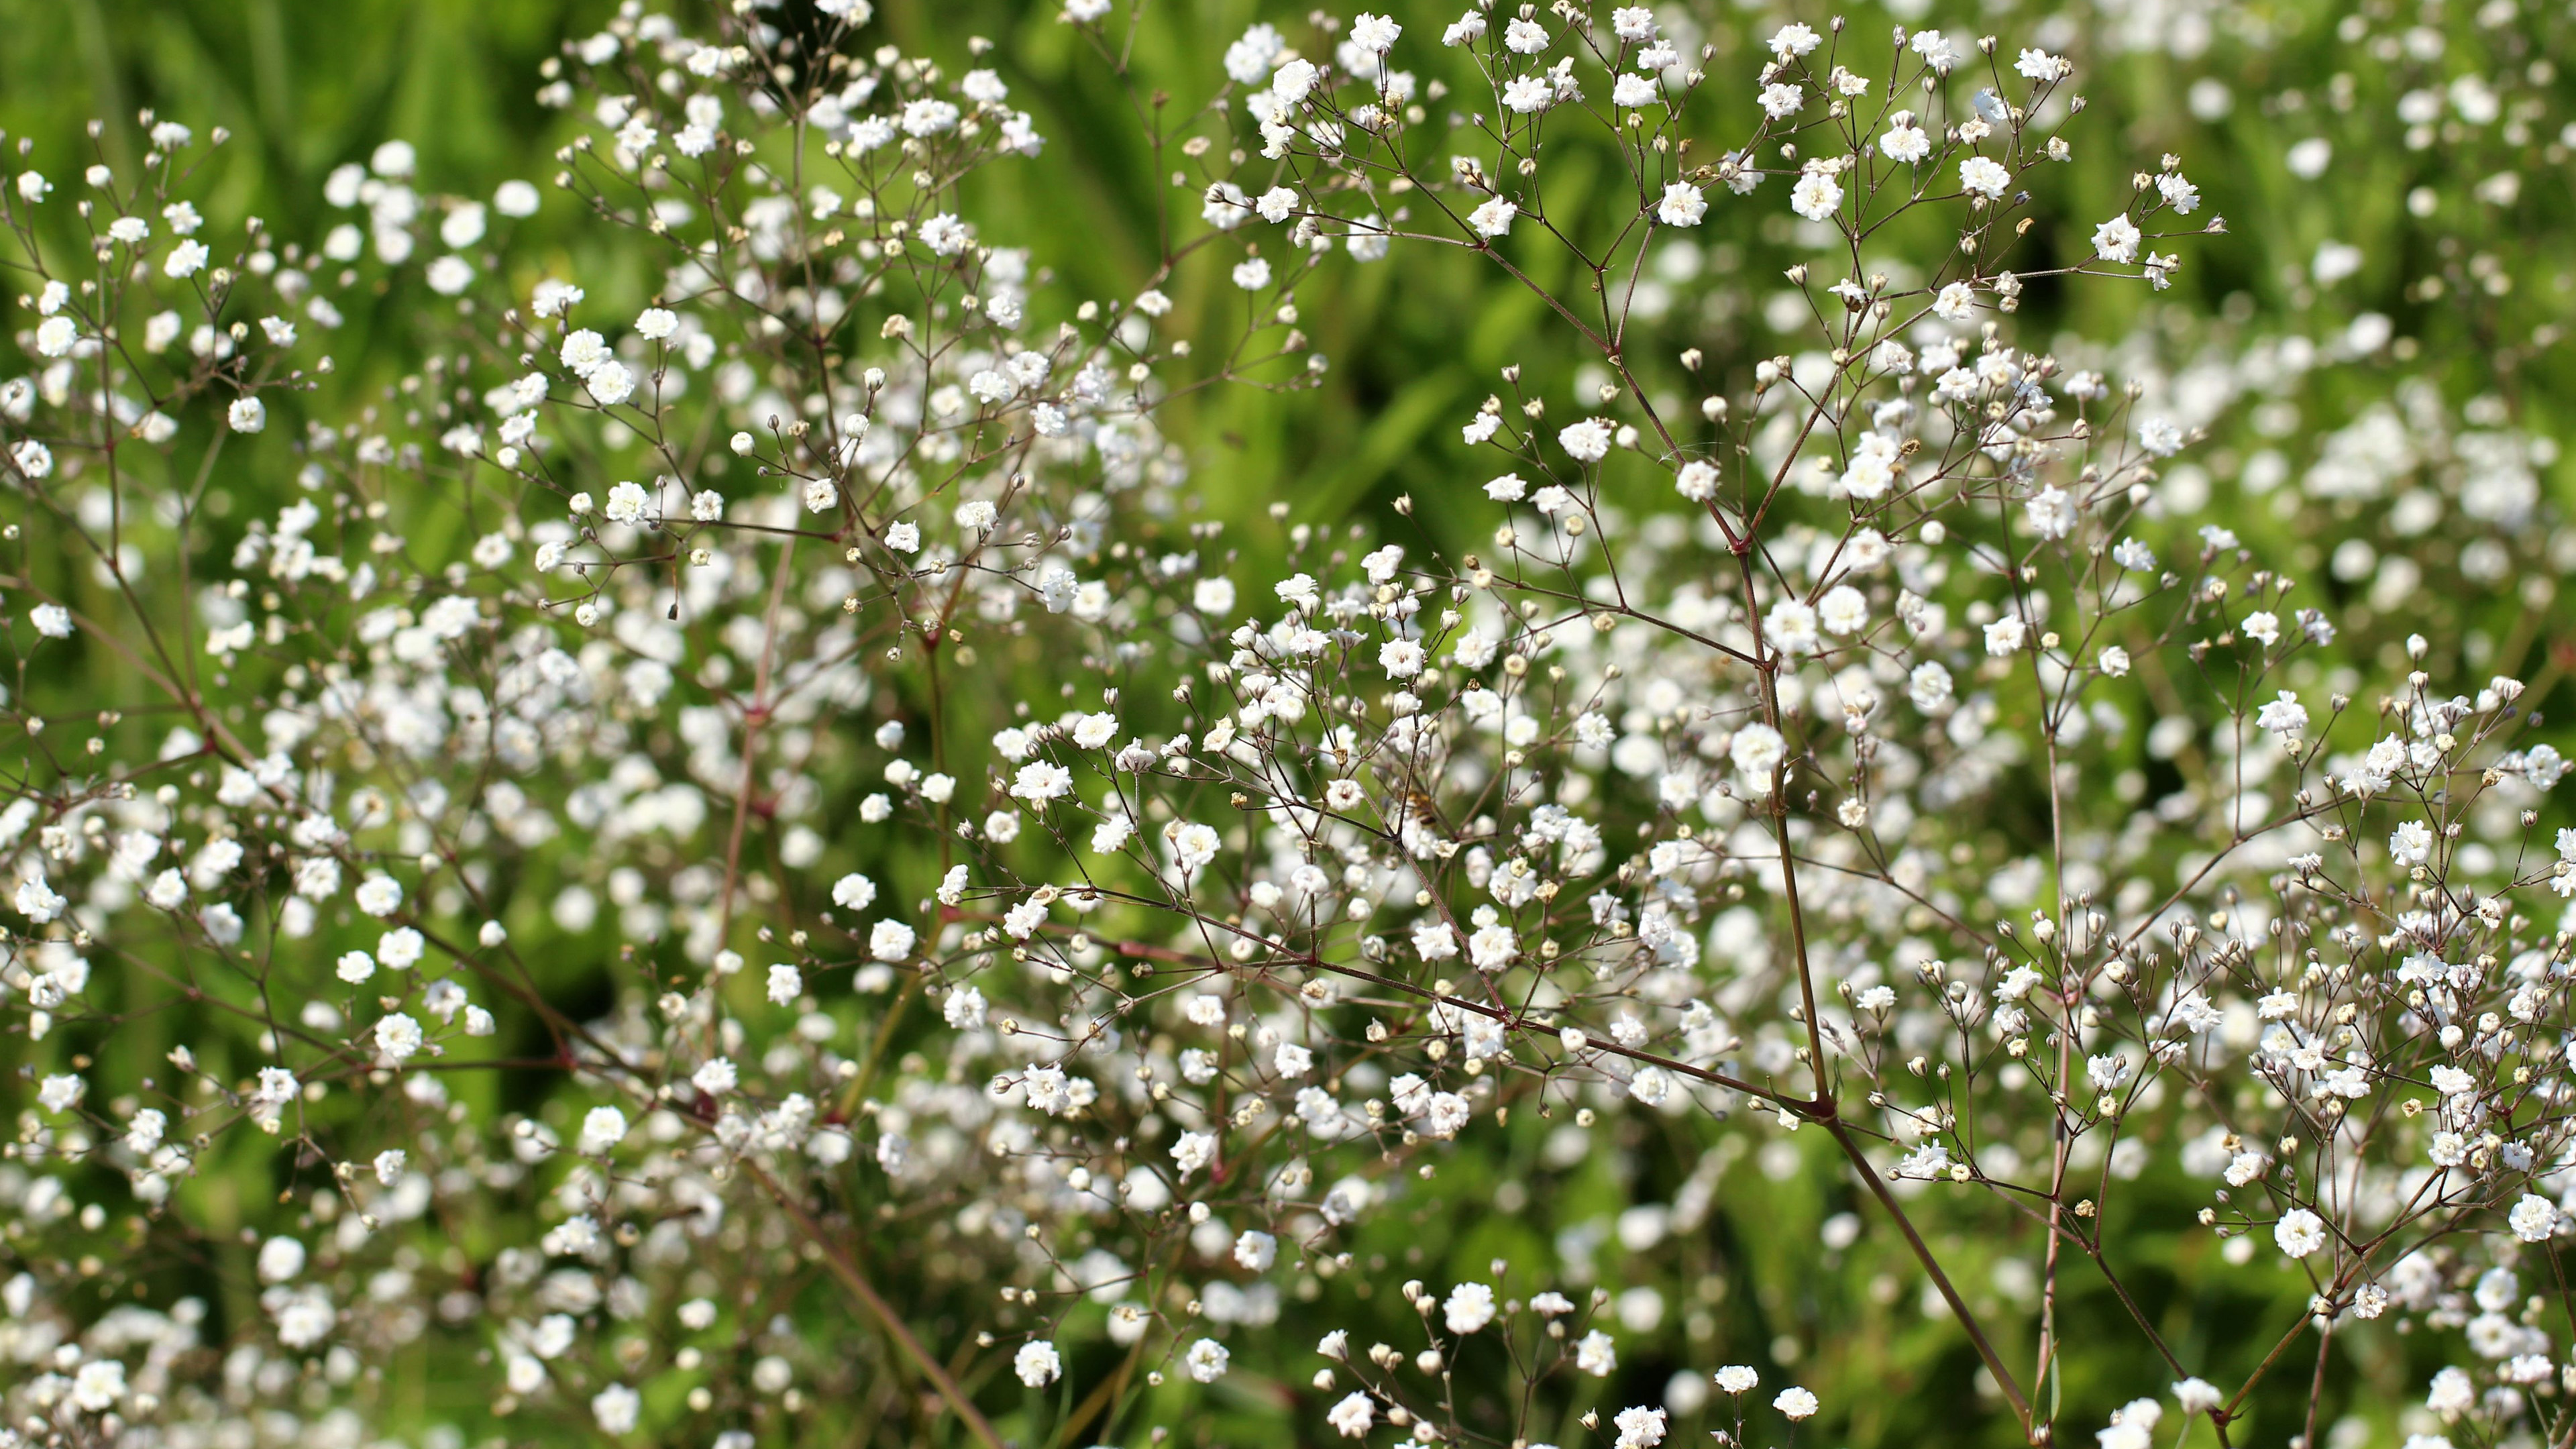 Tiny Flower Wallpaper with Baby's Breath Flower Wallpaper. Wallpaper Download. High Resolution Wallpaper